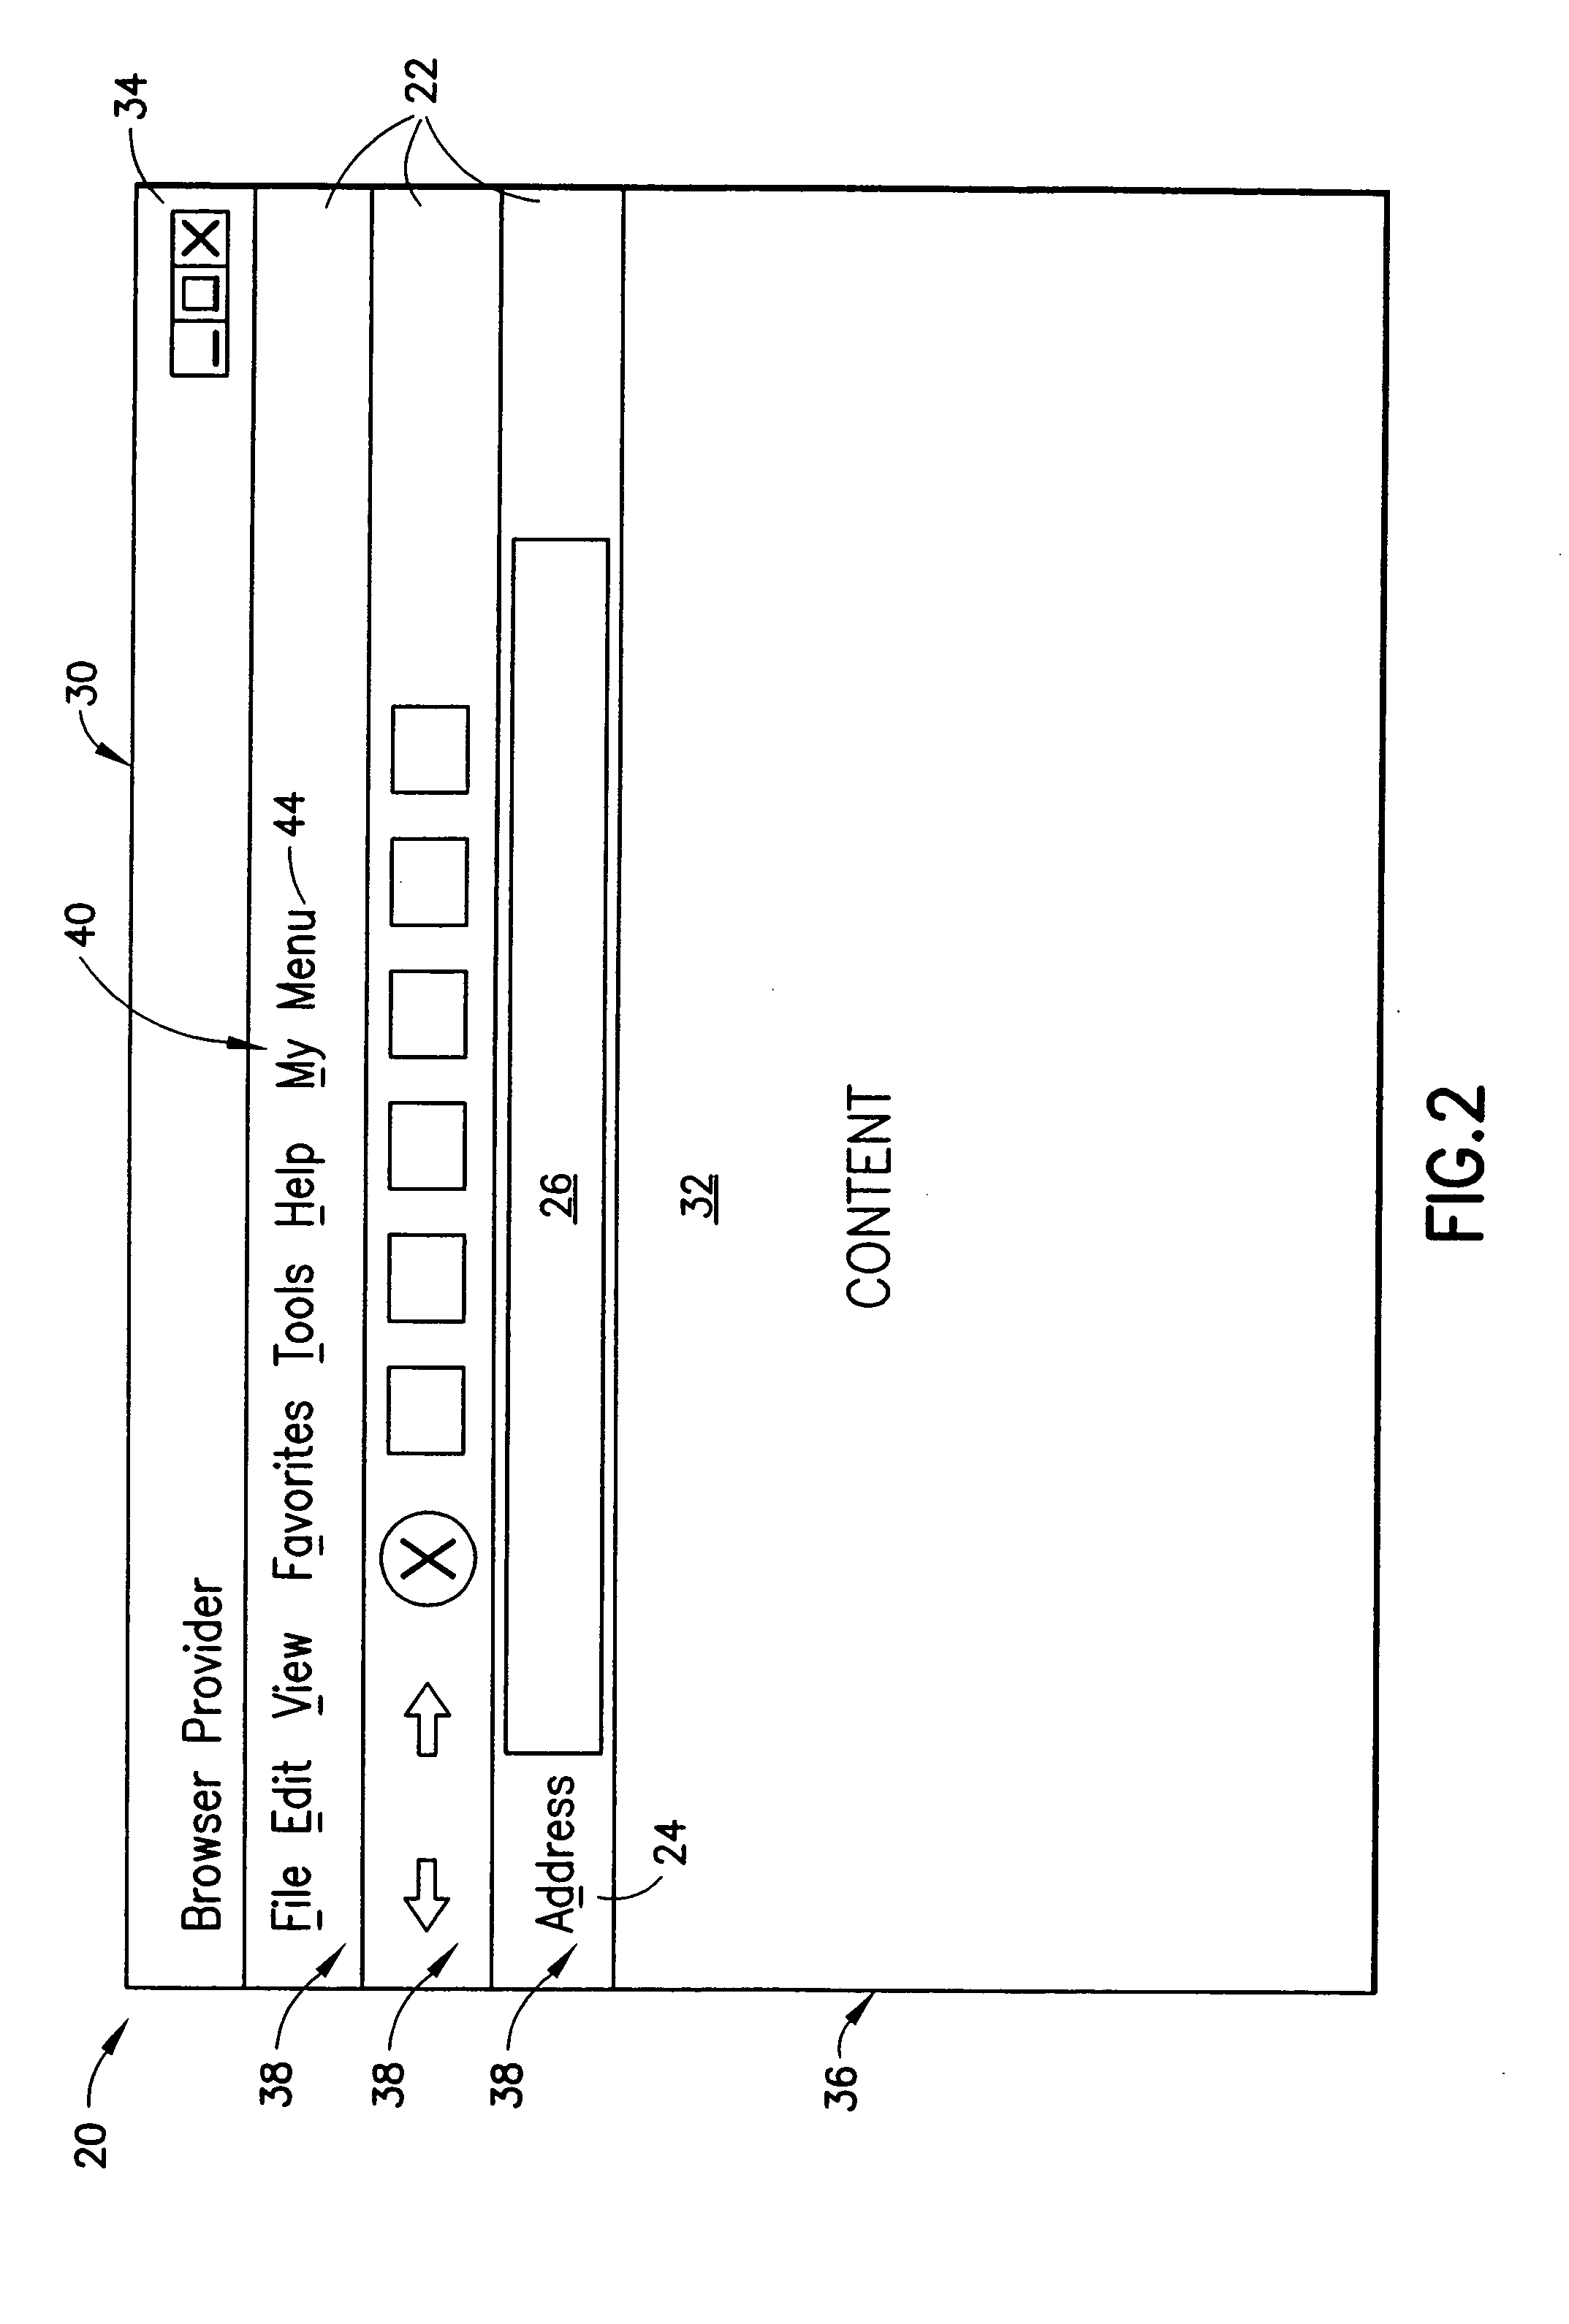 Method of controlling an Internet browser interface and a controllable browser interface